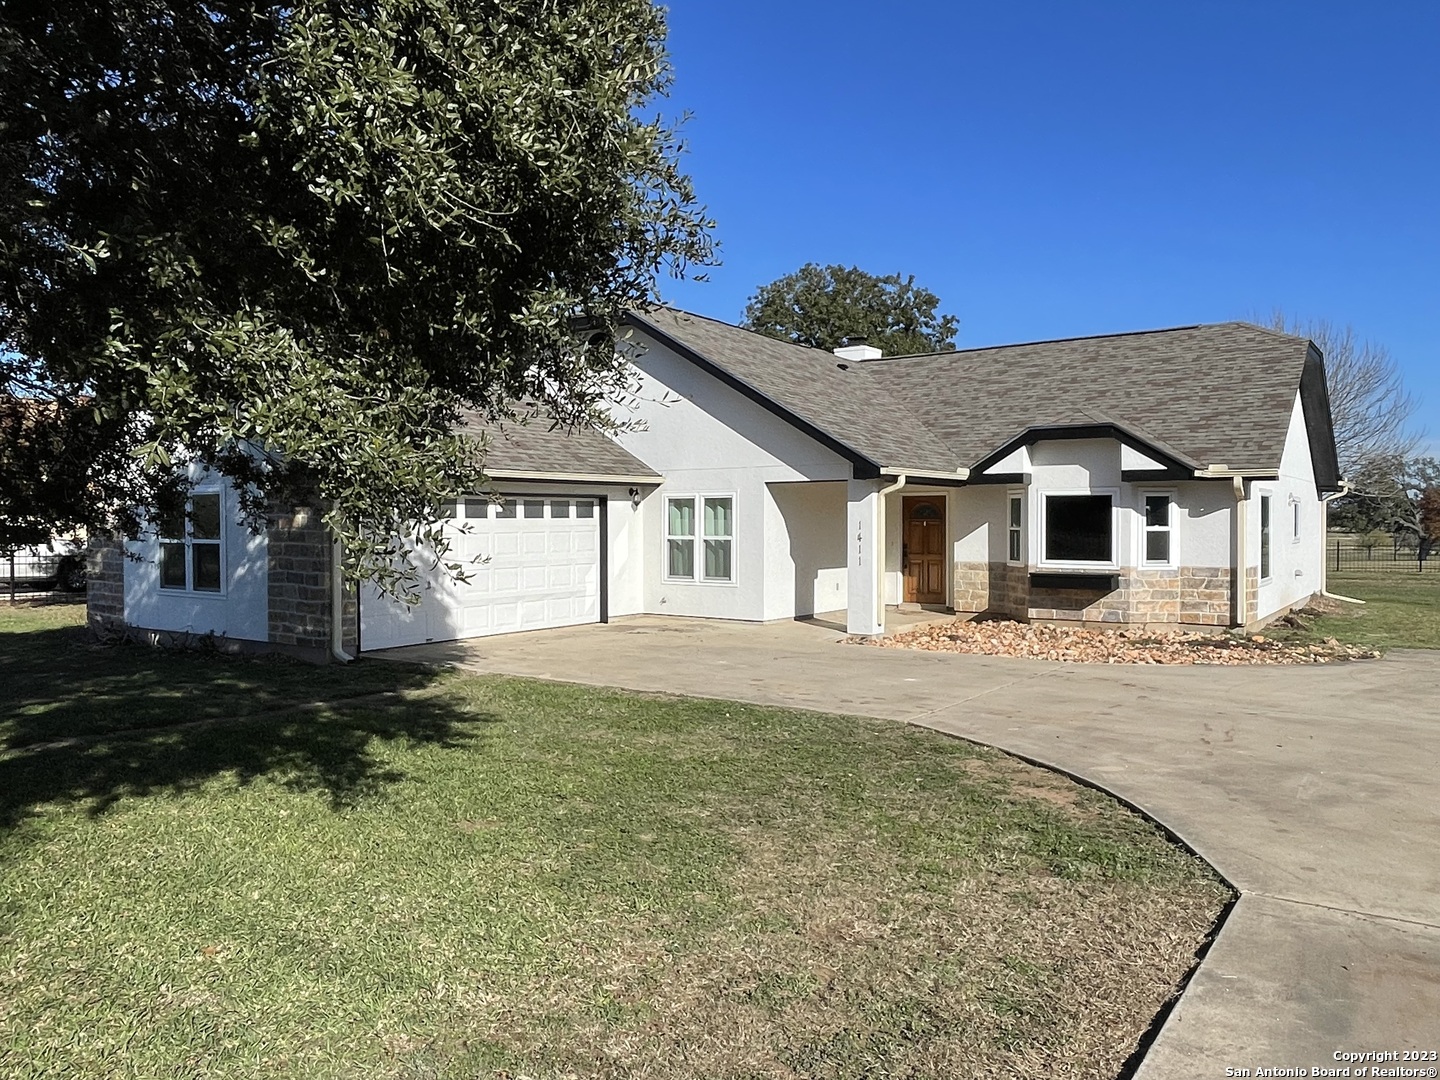 Photo of 1411 County Rd 4516 in Castroville, TX